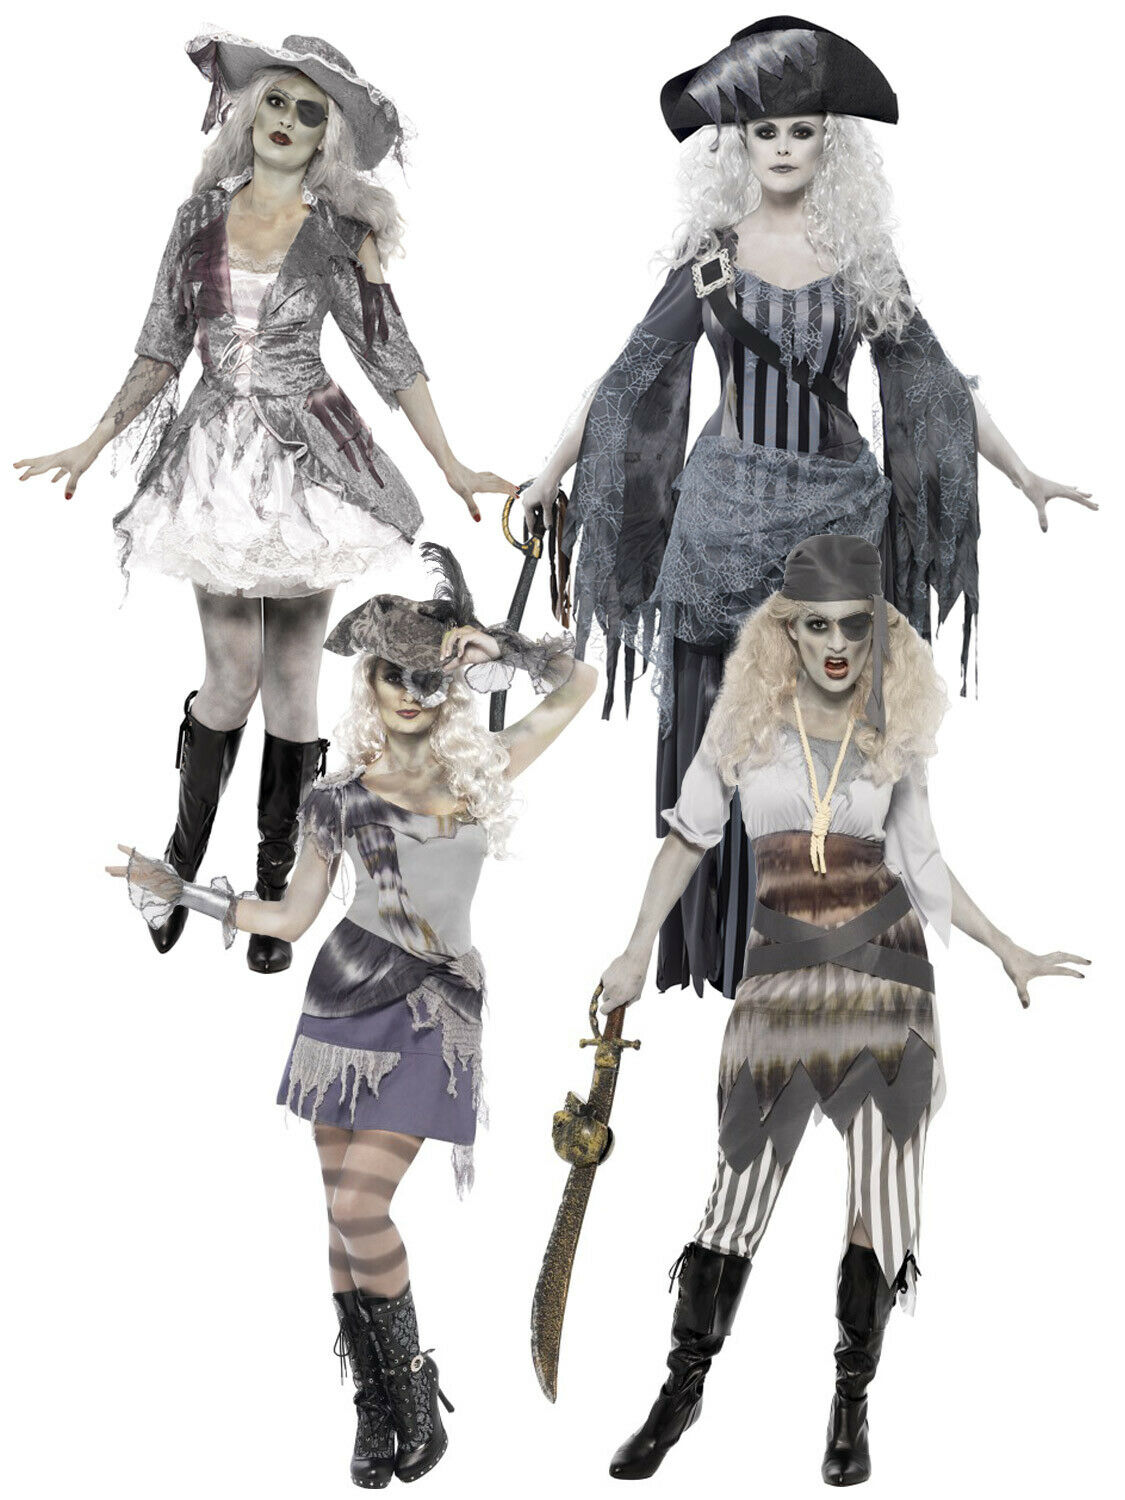 Ladies Zombie Pirate Costume Ghost Ship Womens Halloween Fancy Dress Outfit Ebay 1494